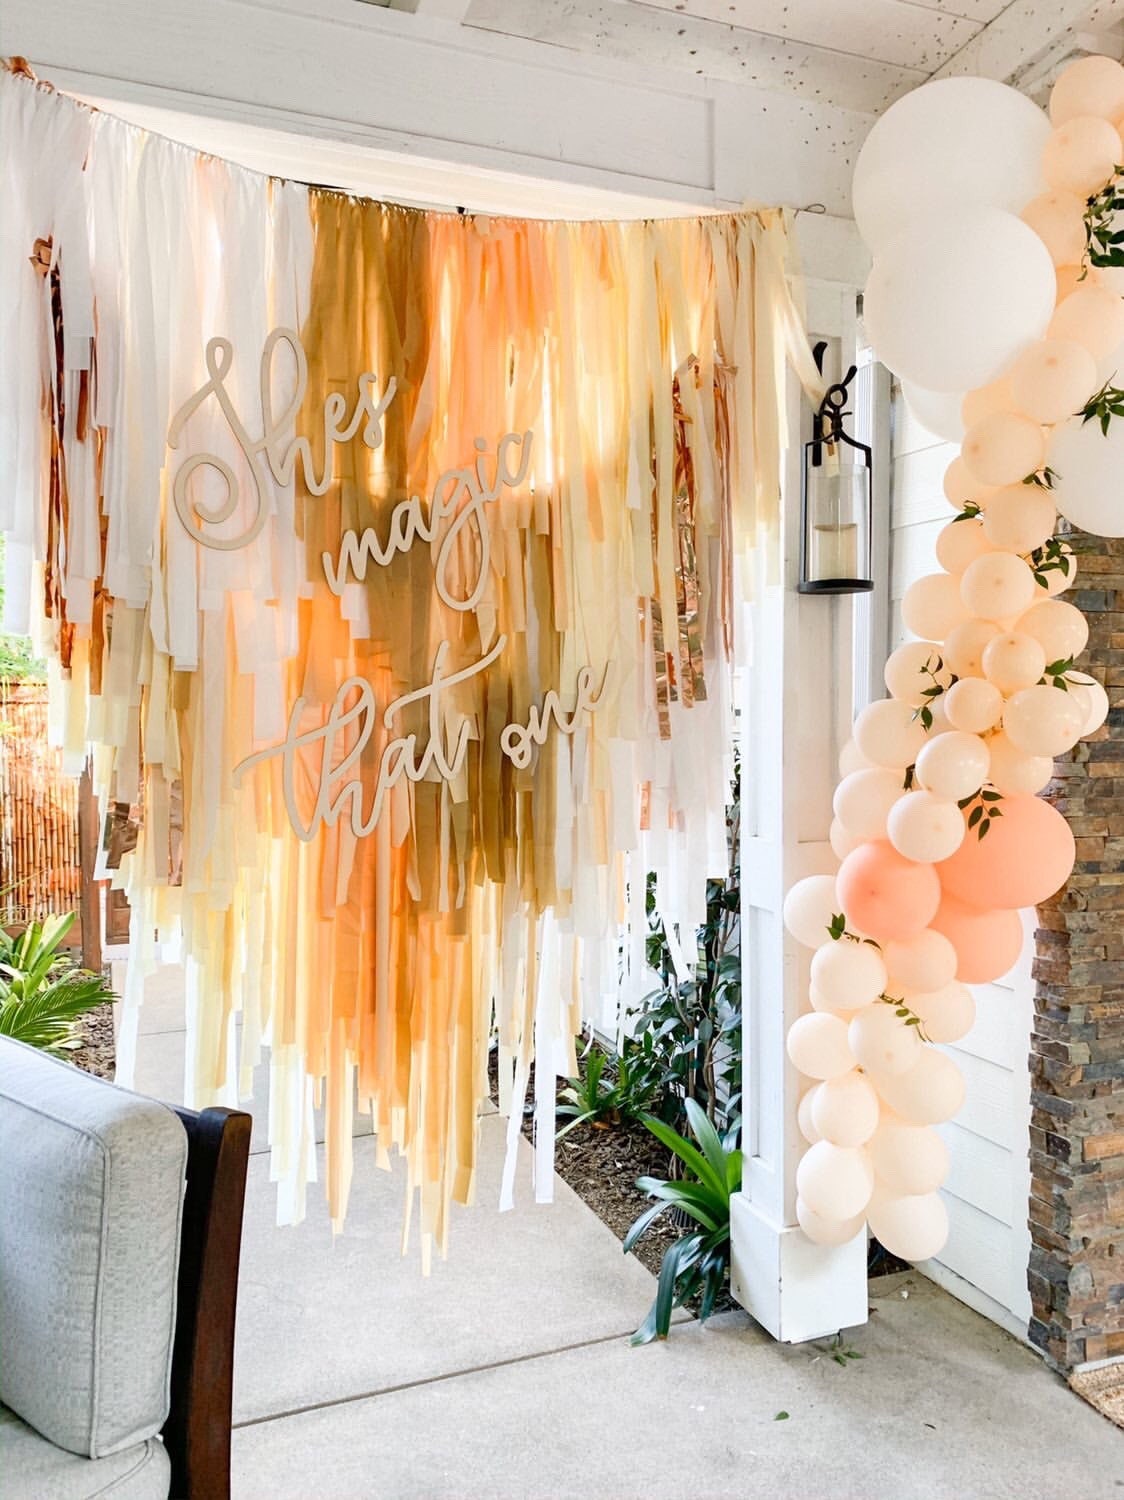 How to Make Ceiling Streamers  DIY Fringe Backdrop for Parties